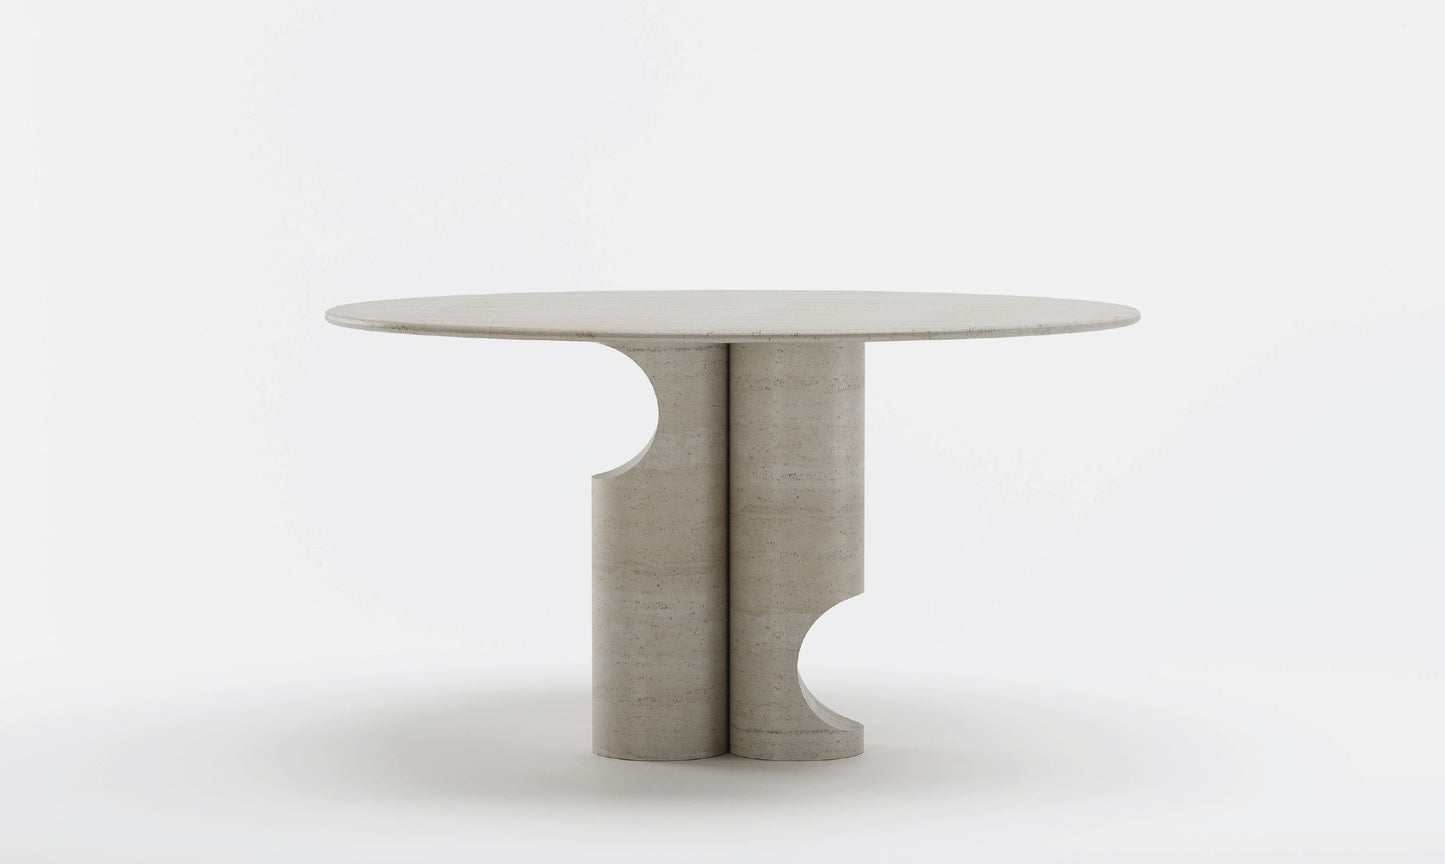 DUO FLUCTO I Dining table by Emanuele Santalena